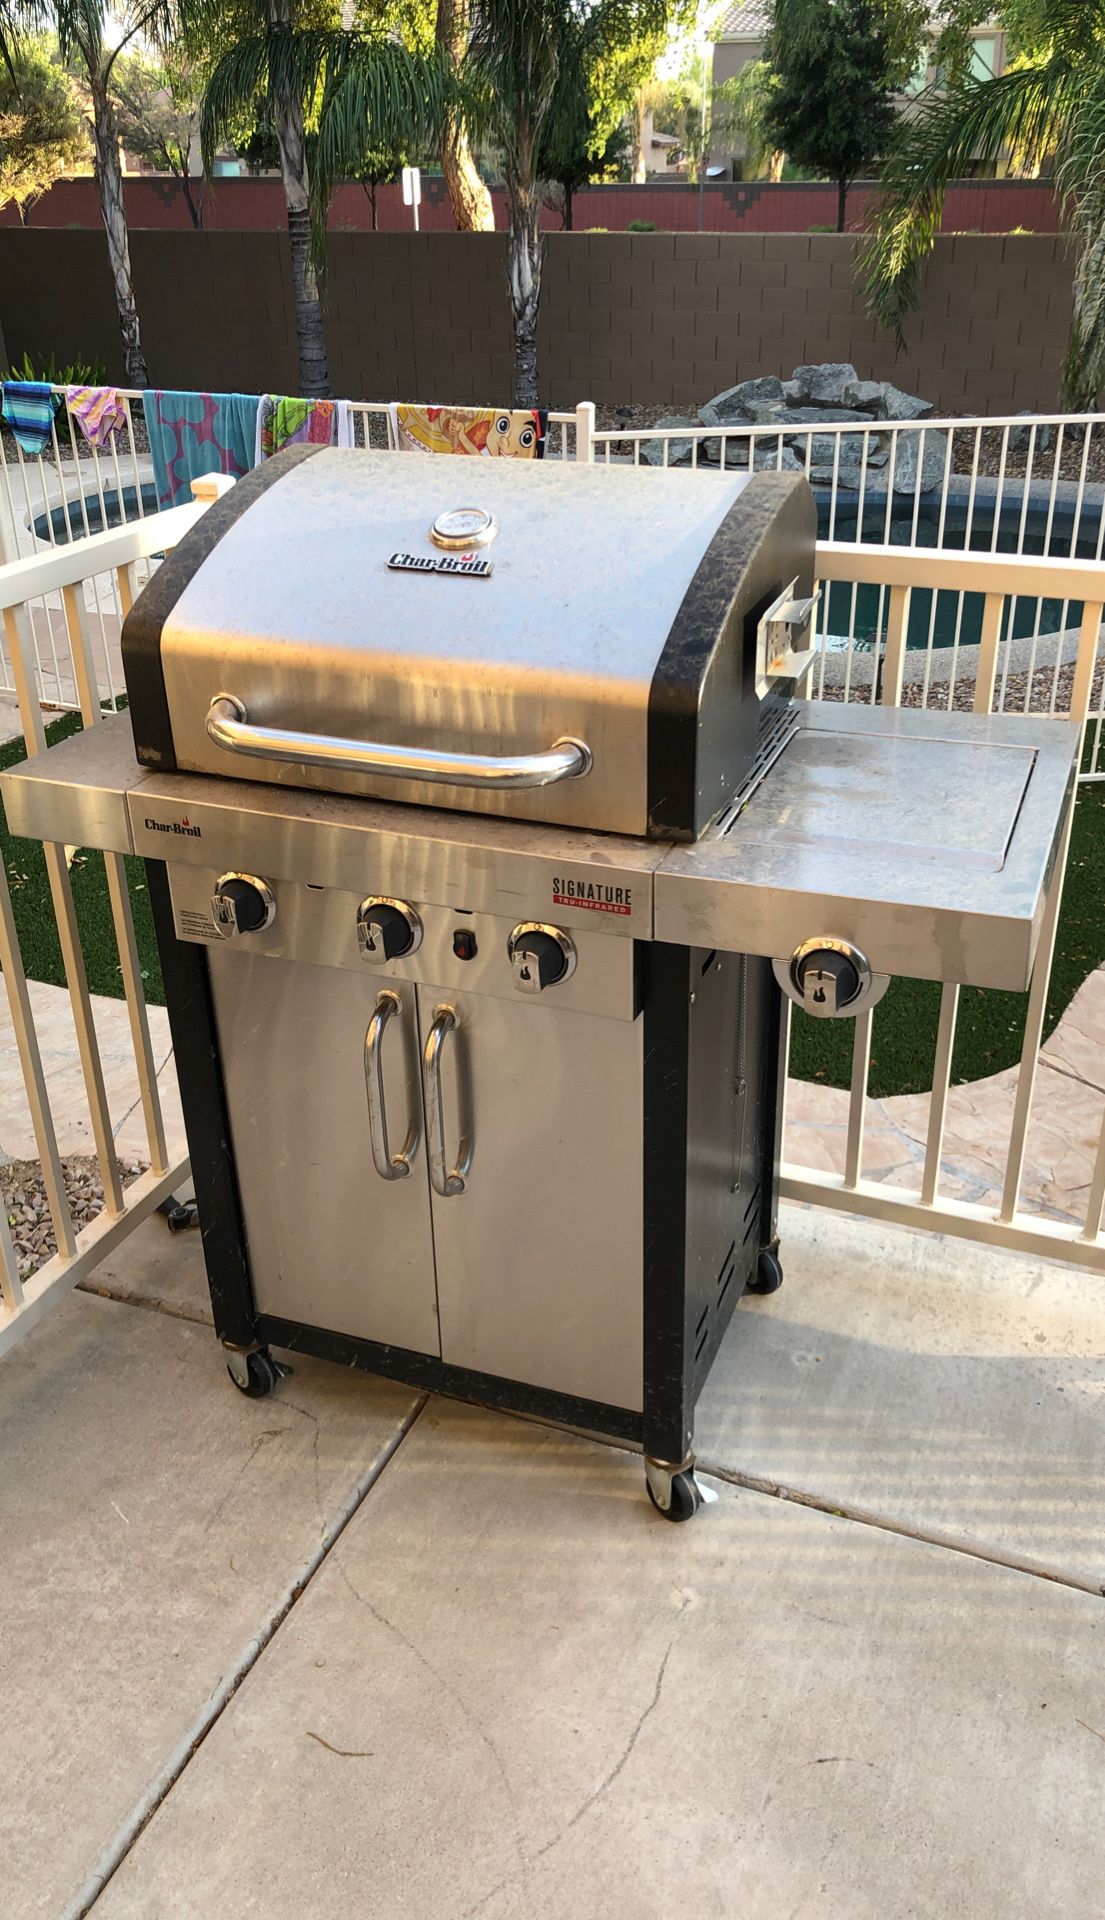 Char-Broil Signature Infrared Grill